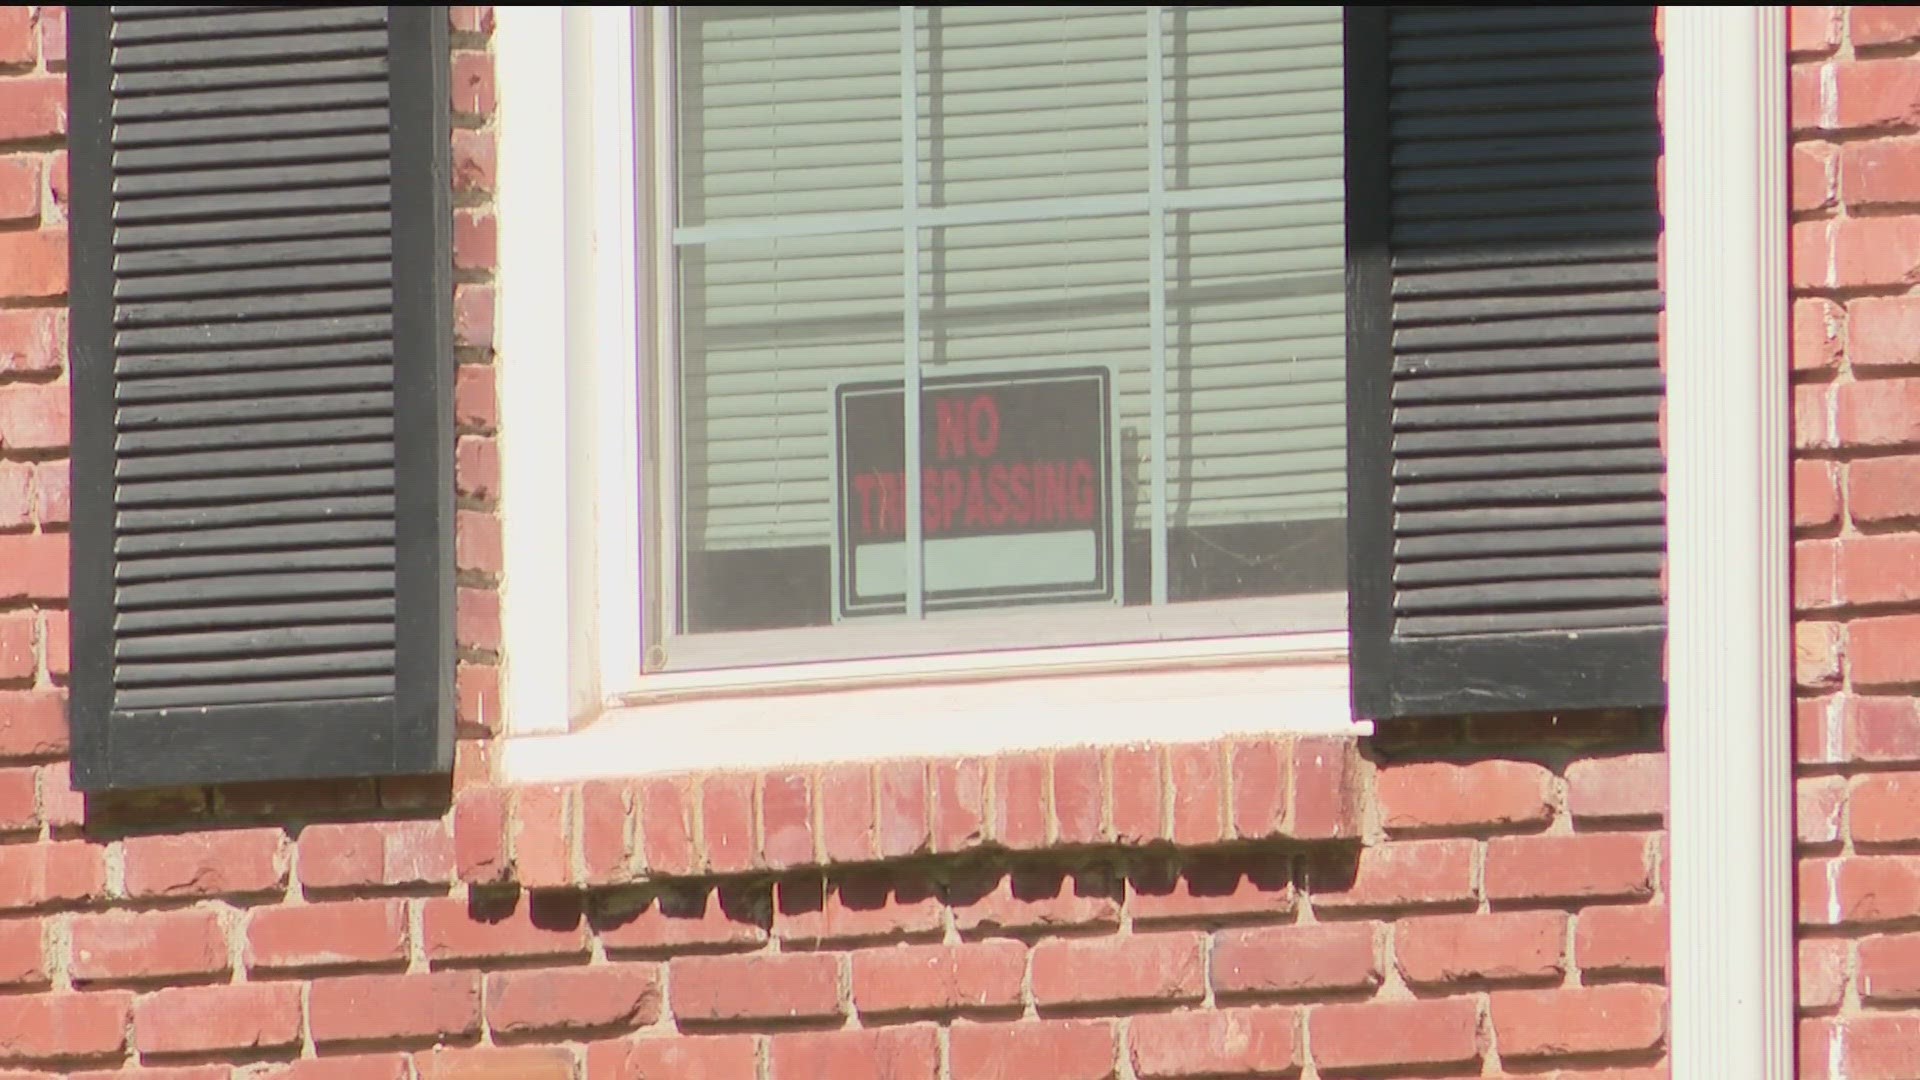 The homeowner arrived to her rental home Monday to find a couple living inside without her permission.